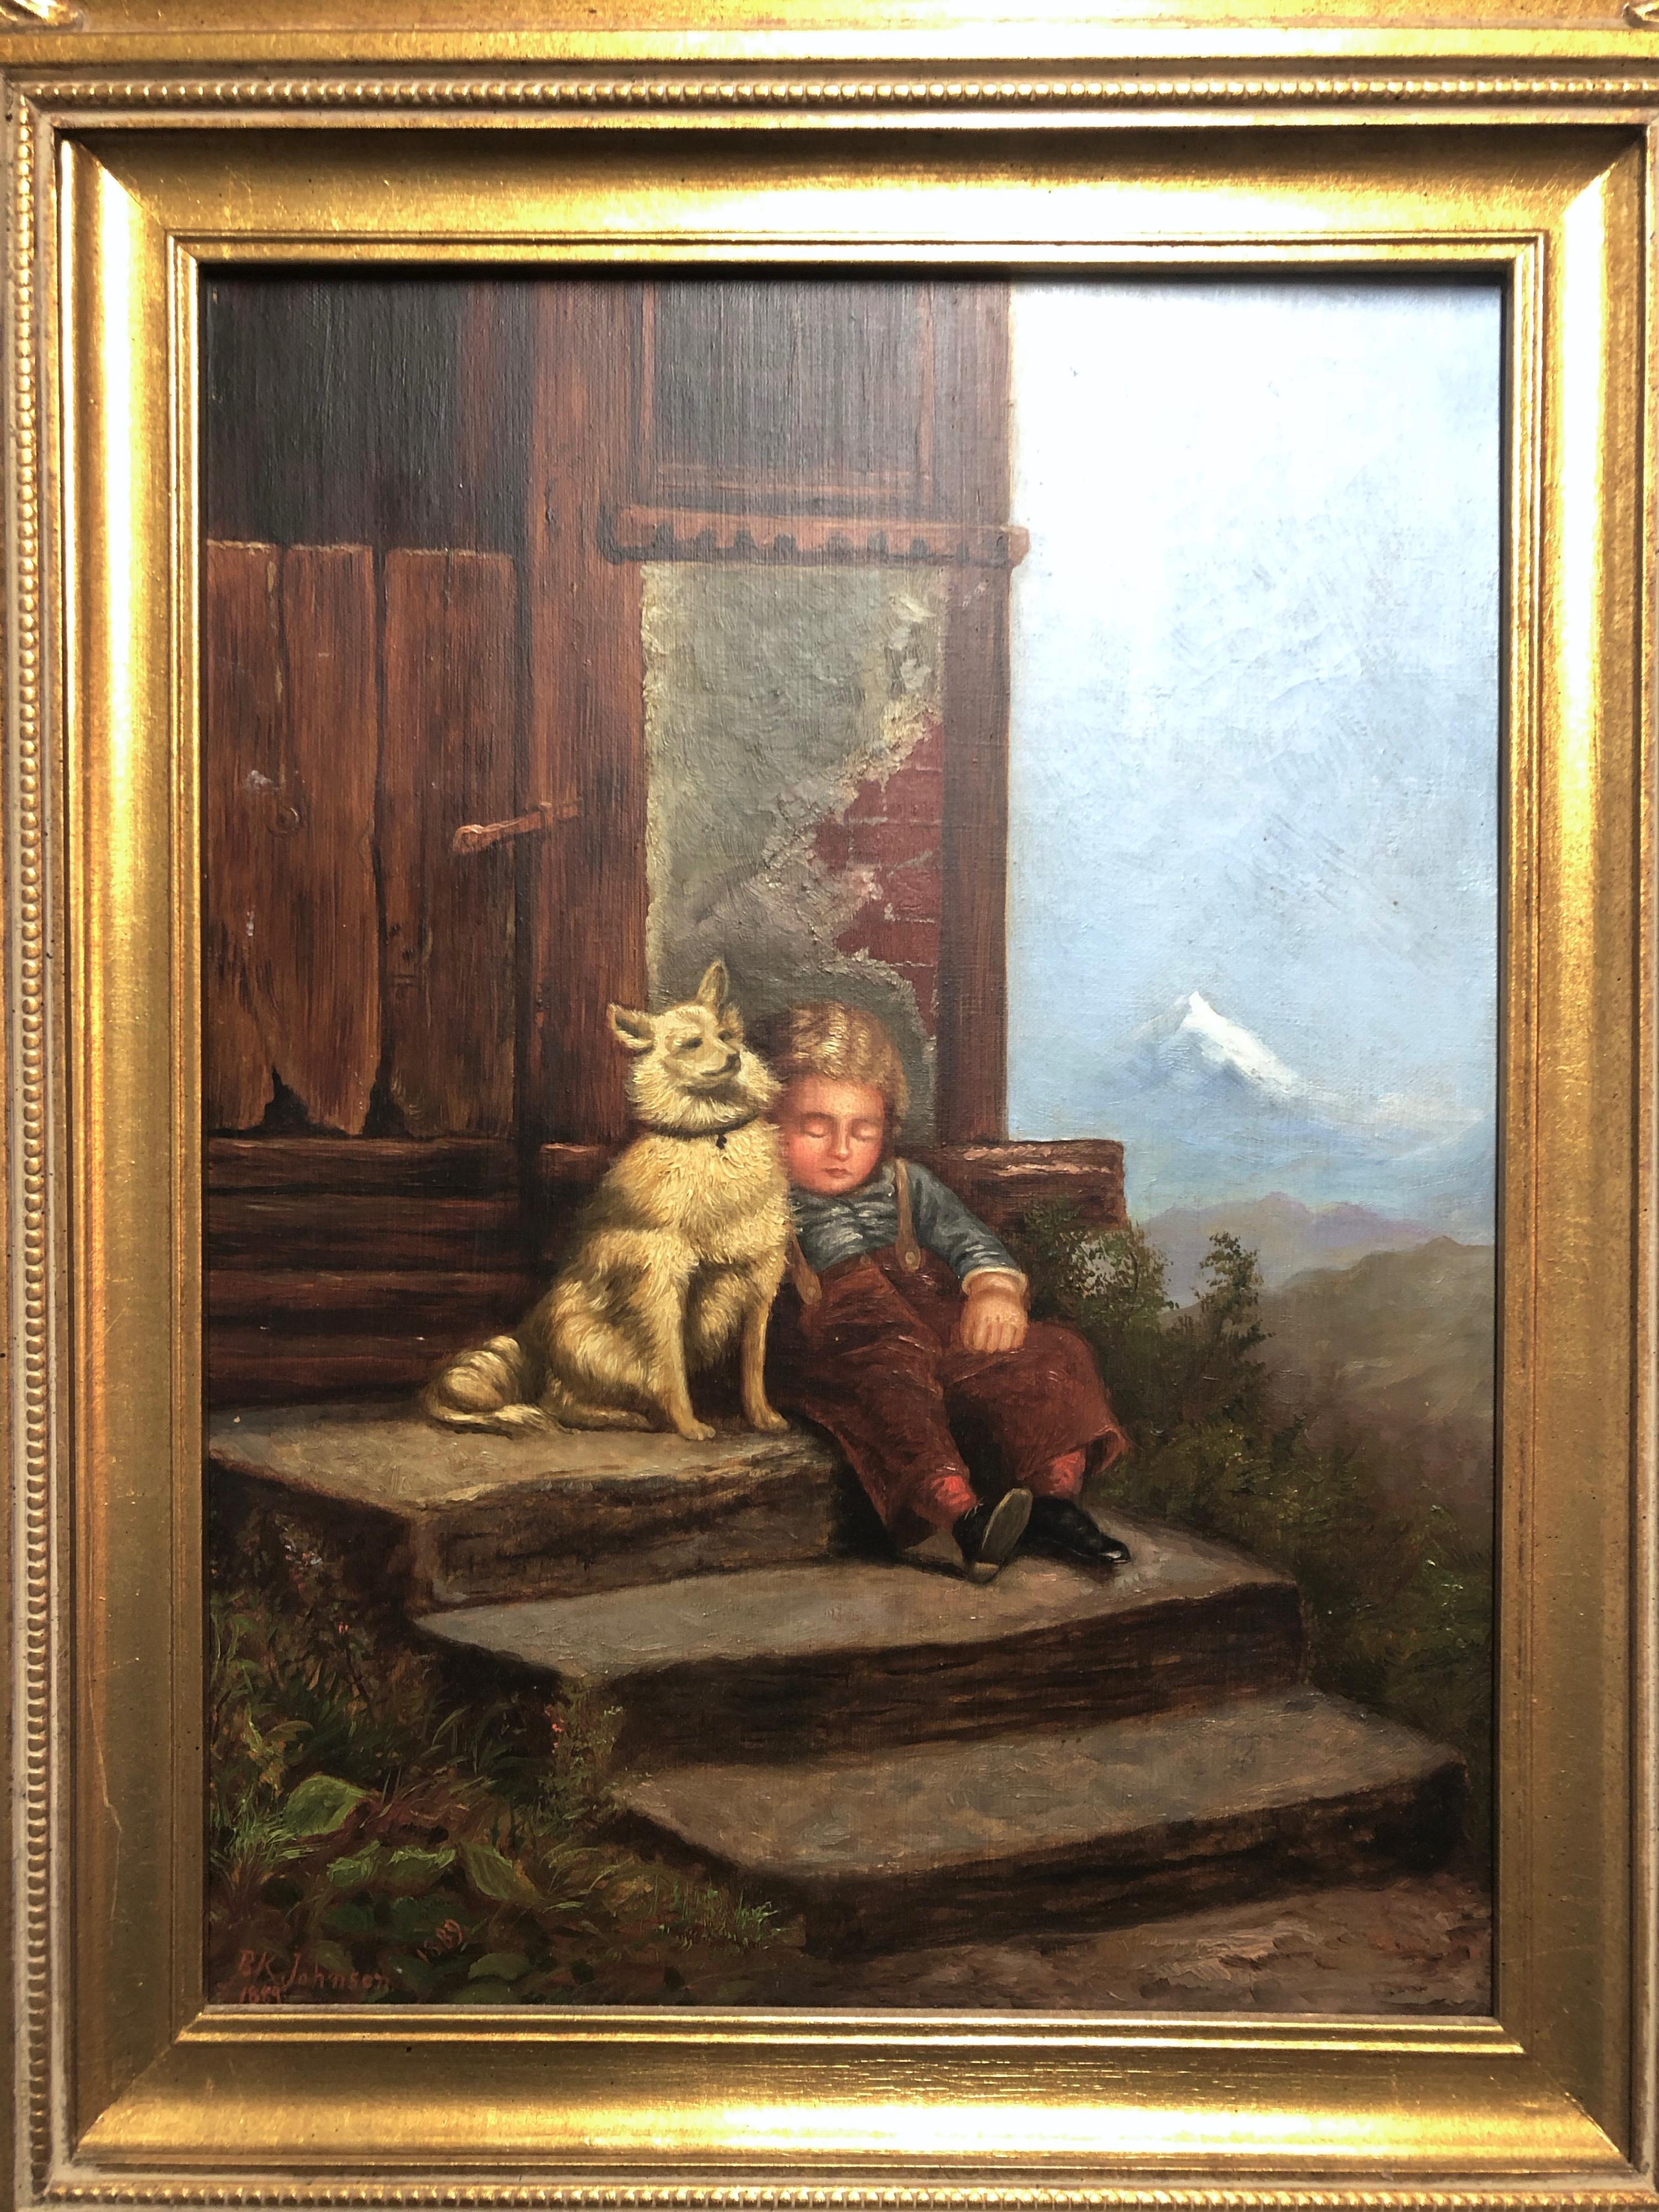 This is a lovely framed oil on canvas painting of a boy asleep on the house steps while leaning on his white dog. It is signed by B.K. Johnson and dated 1889. The frame is a wood gilded frame that nicely compliments the work of art and is 22.5 x